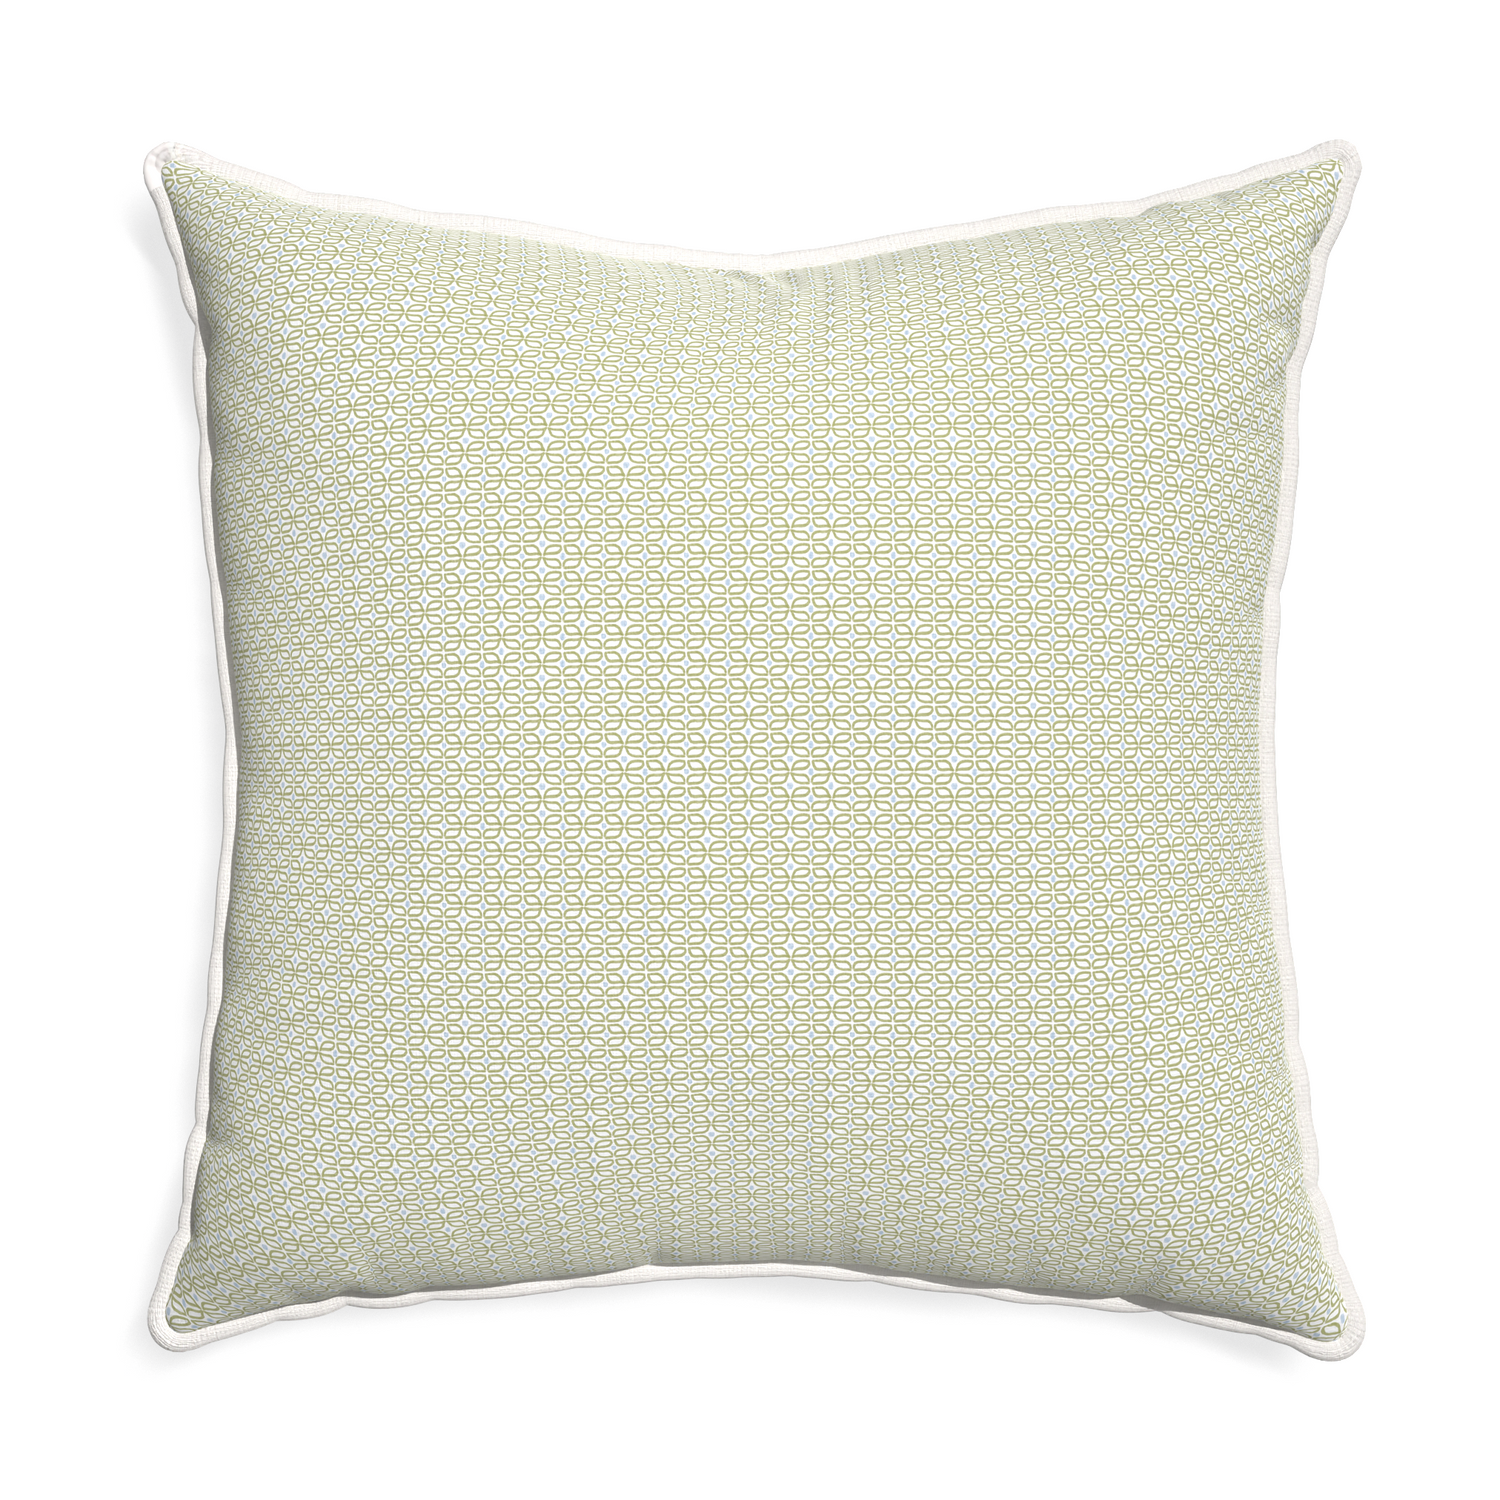 Euro-sham loomi moss custom moss green geometricpillow with snow piping on white background